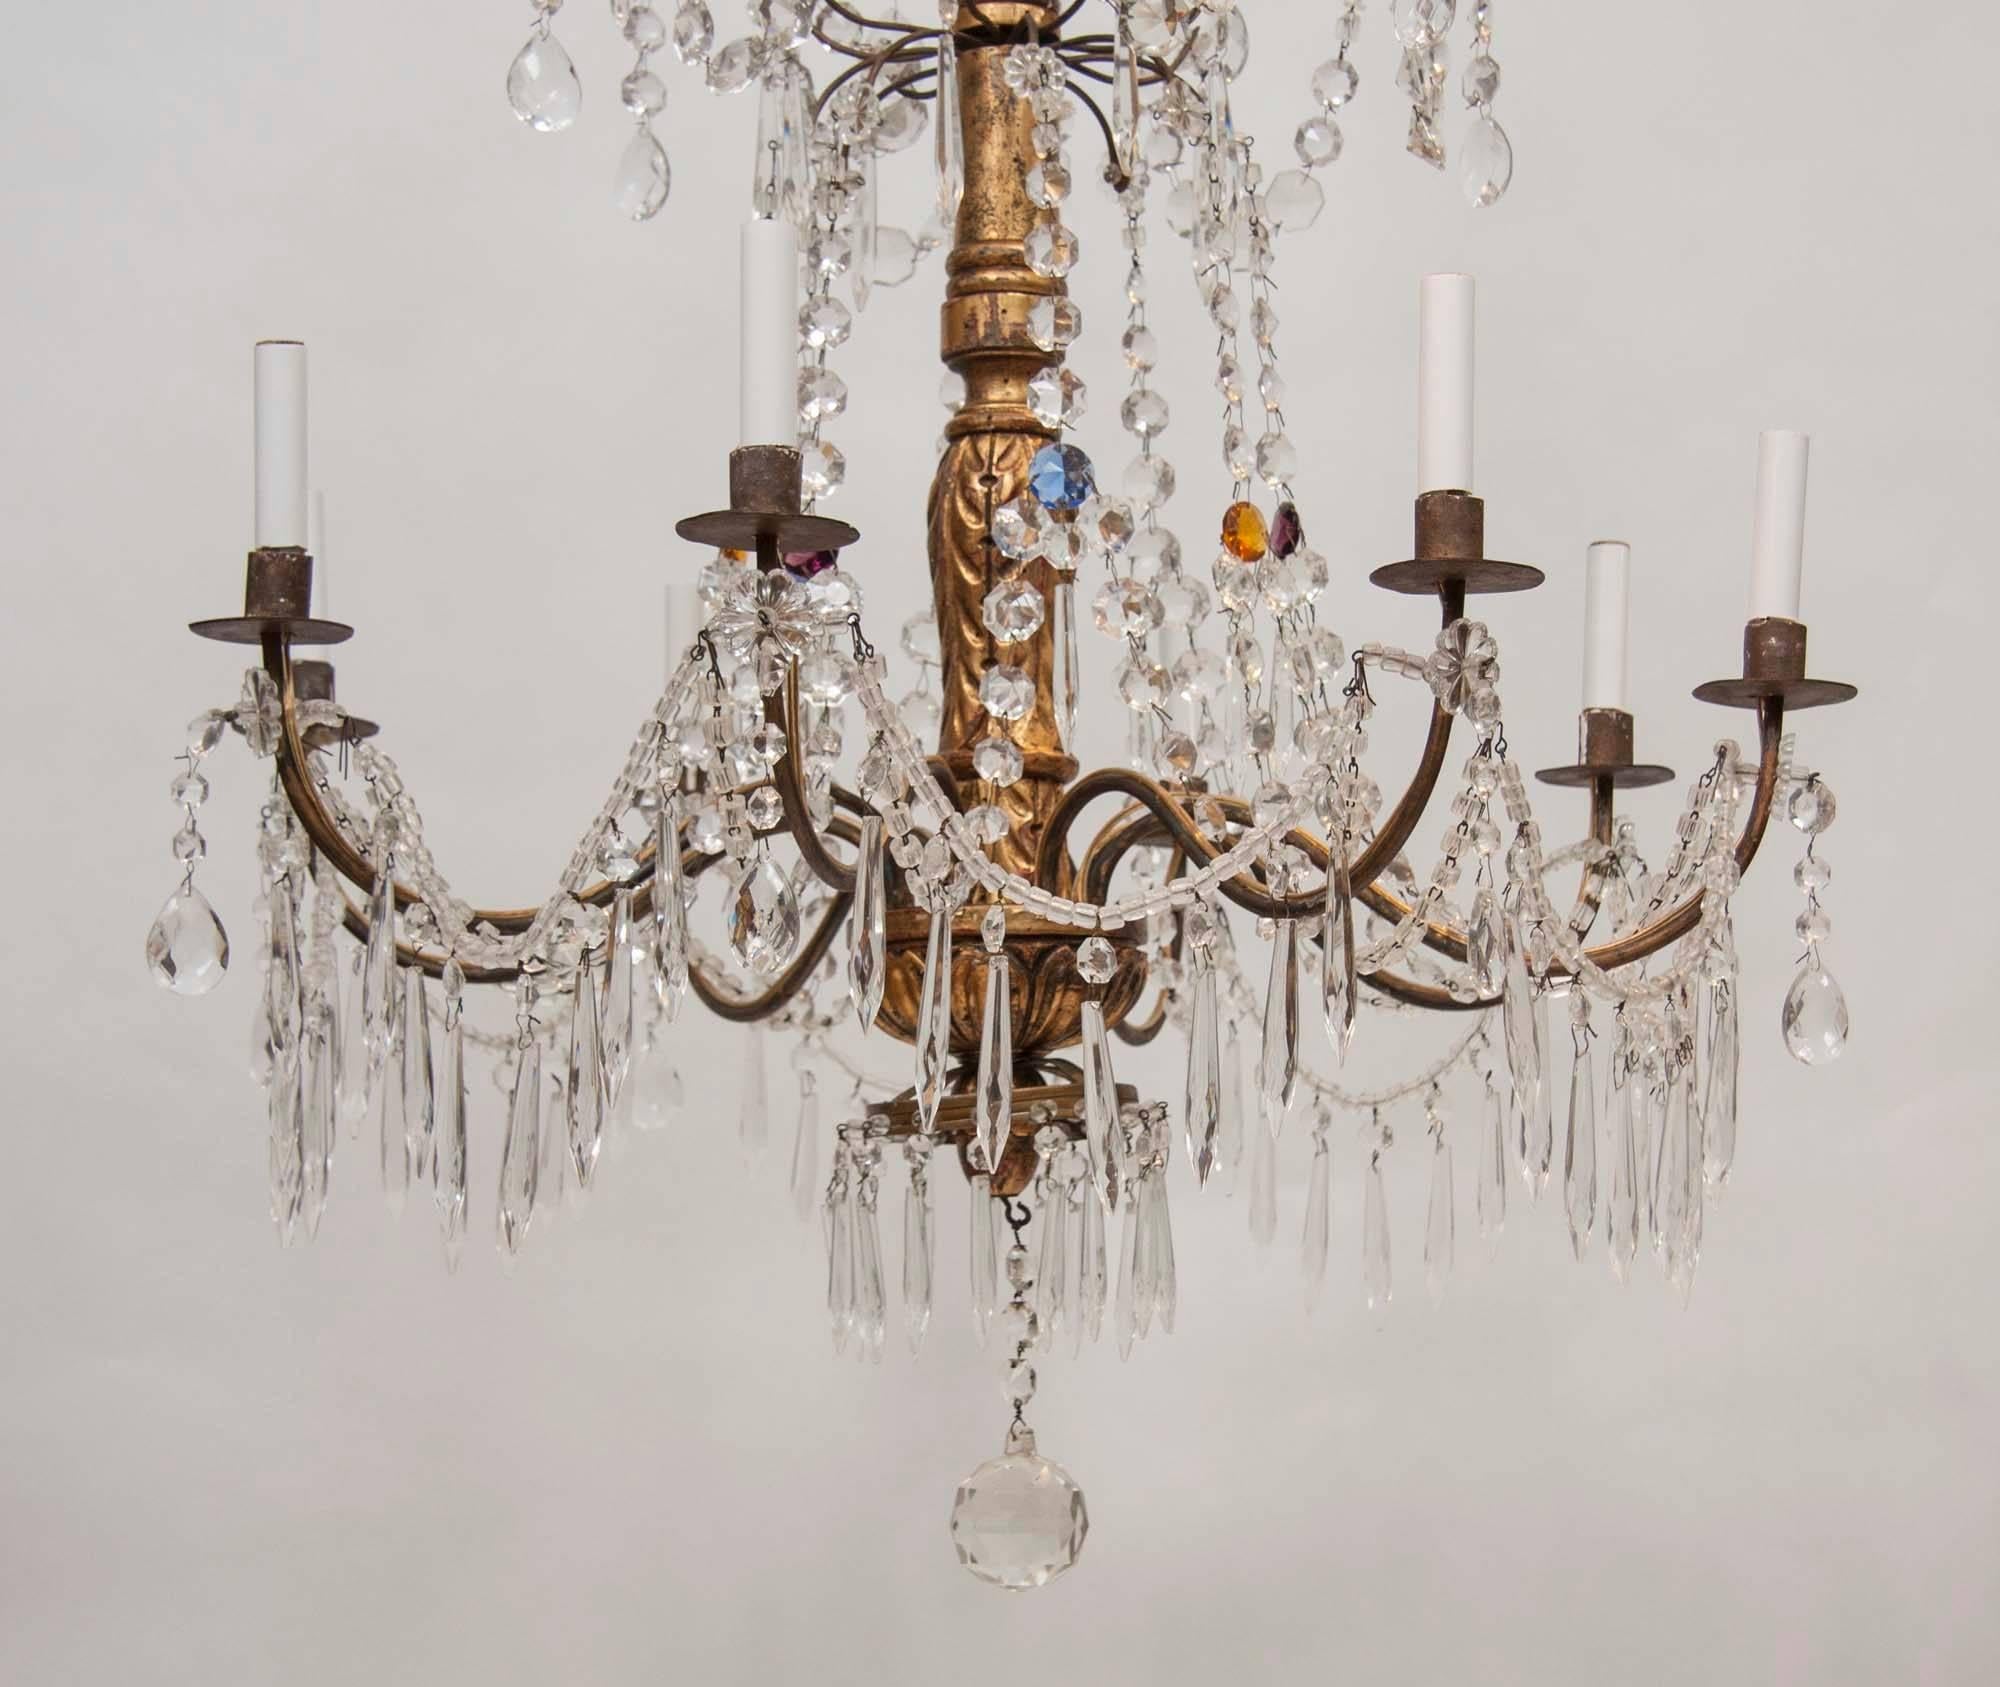 Hand-Carved Italian 18th Century Genovese Giltwood and Crystal Chandelier For Sale